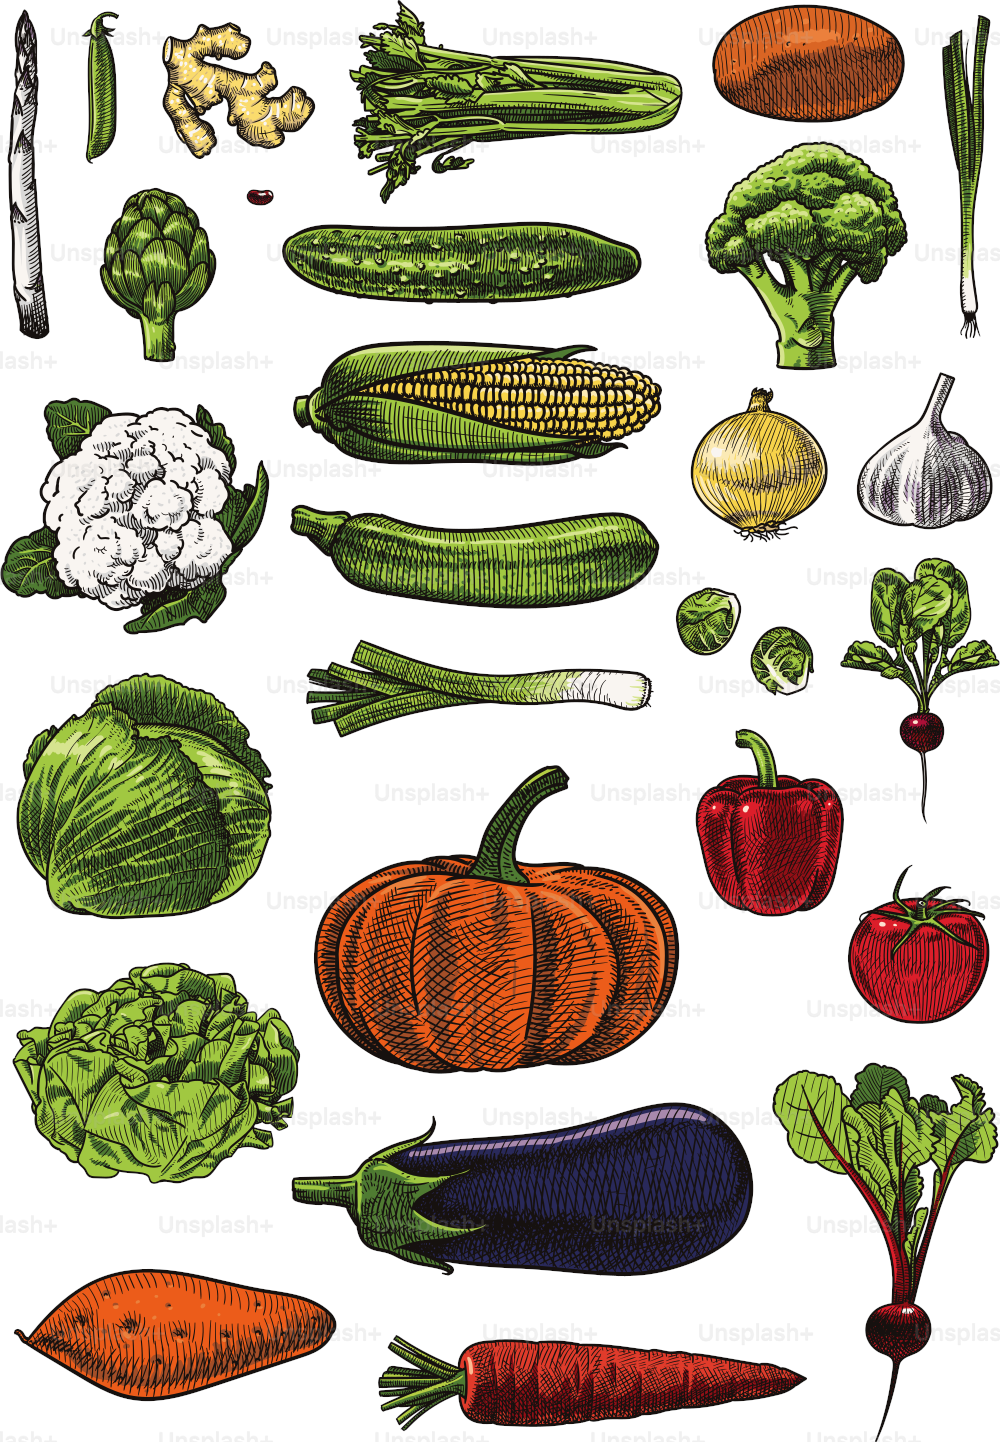 Vector illustrations of assorted vegetables. Carefully grouped and labeled, easy to select and edit.